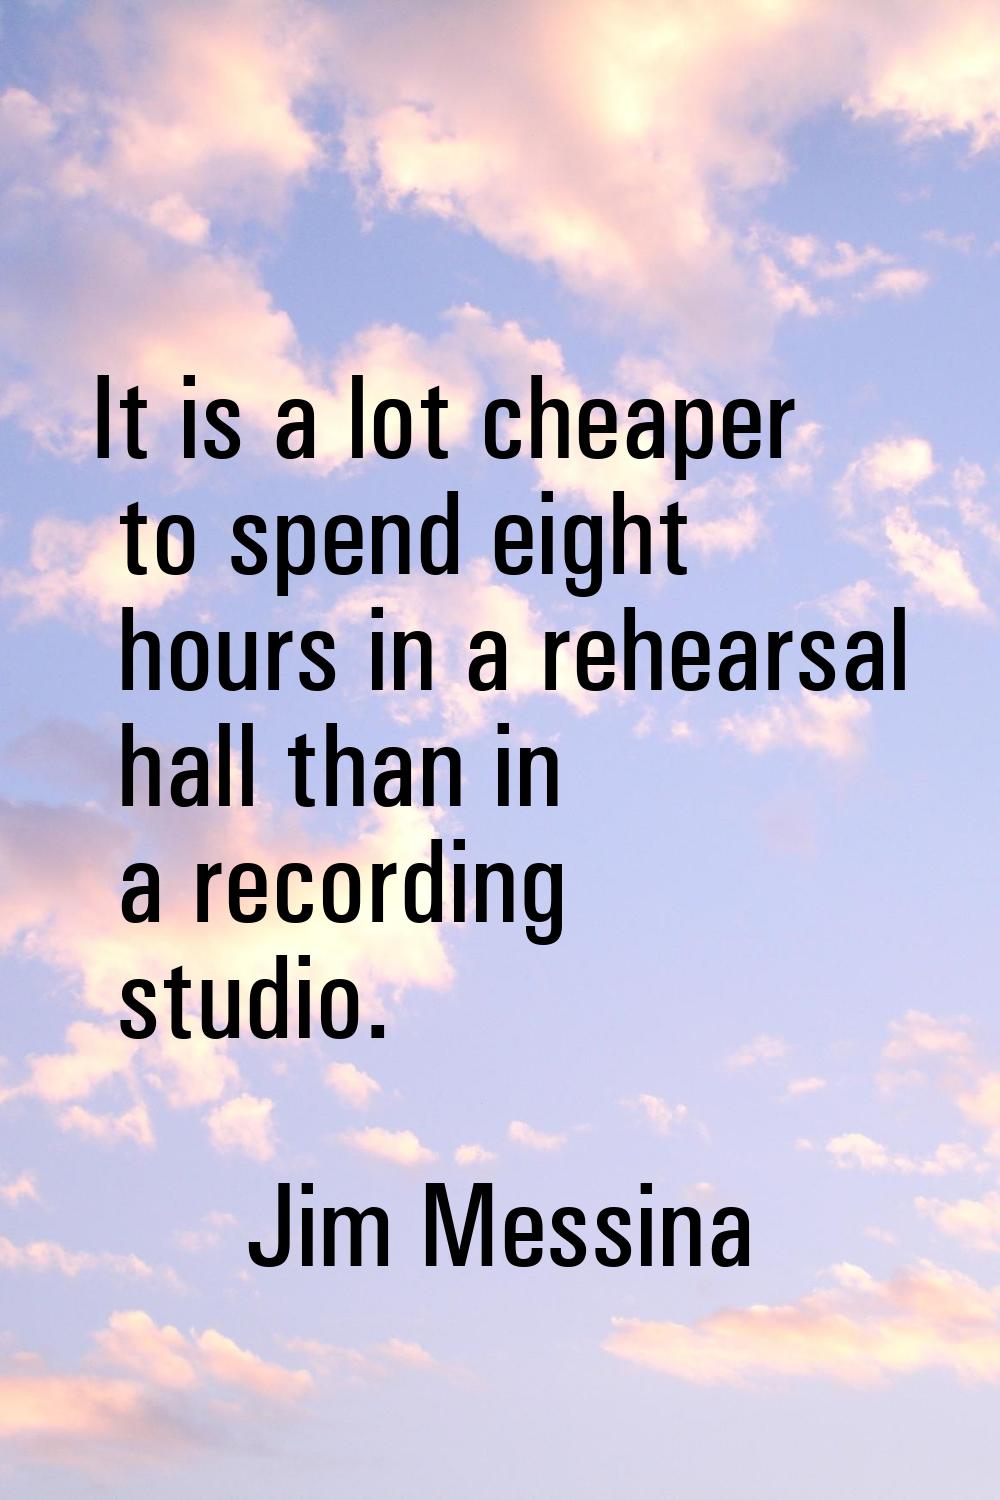 It is a lot cheaper to spend eight hours in a rehearsal hall than in a recording studio.